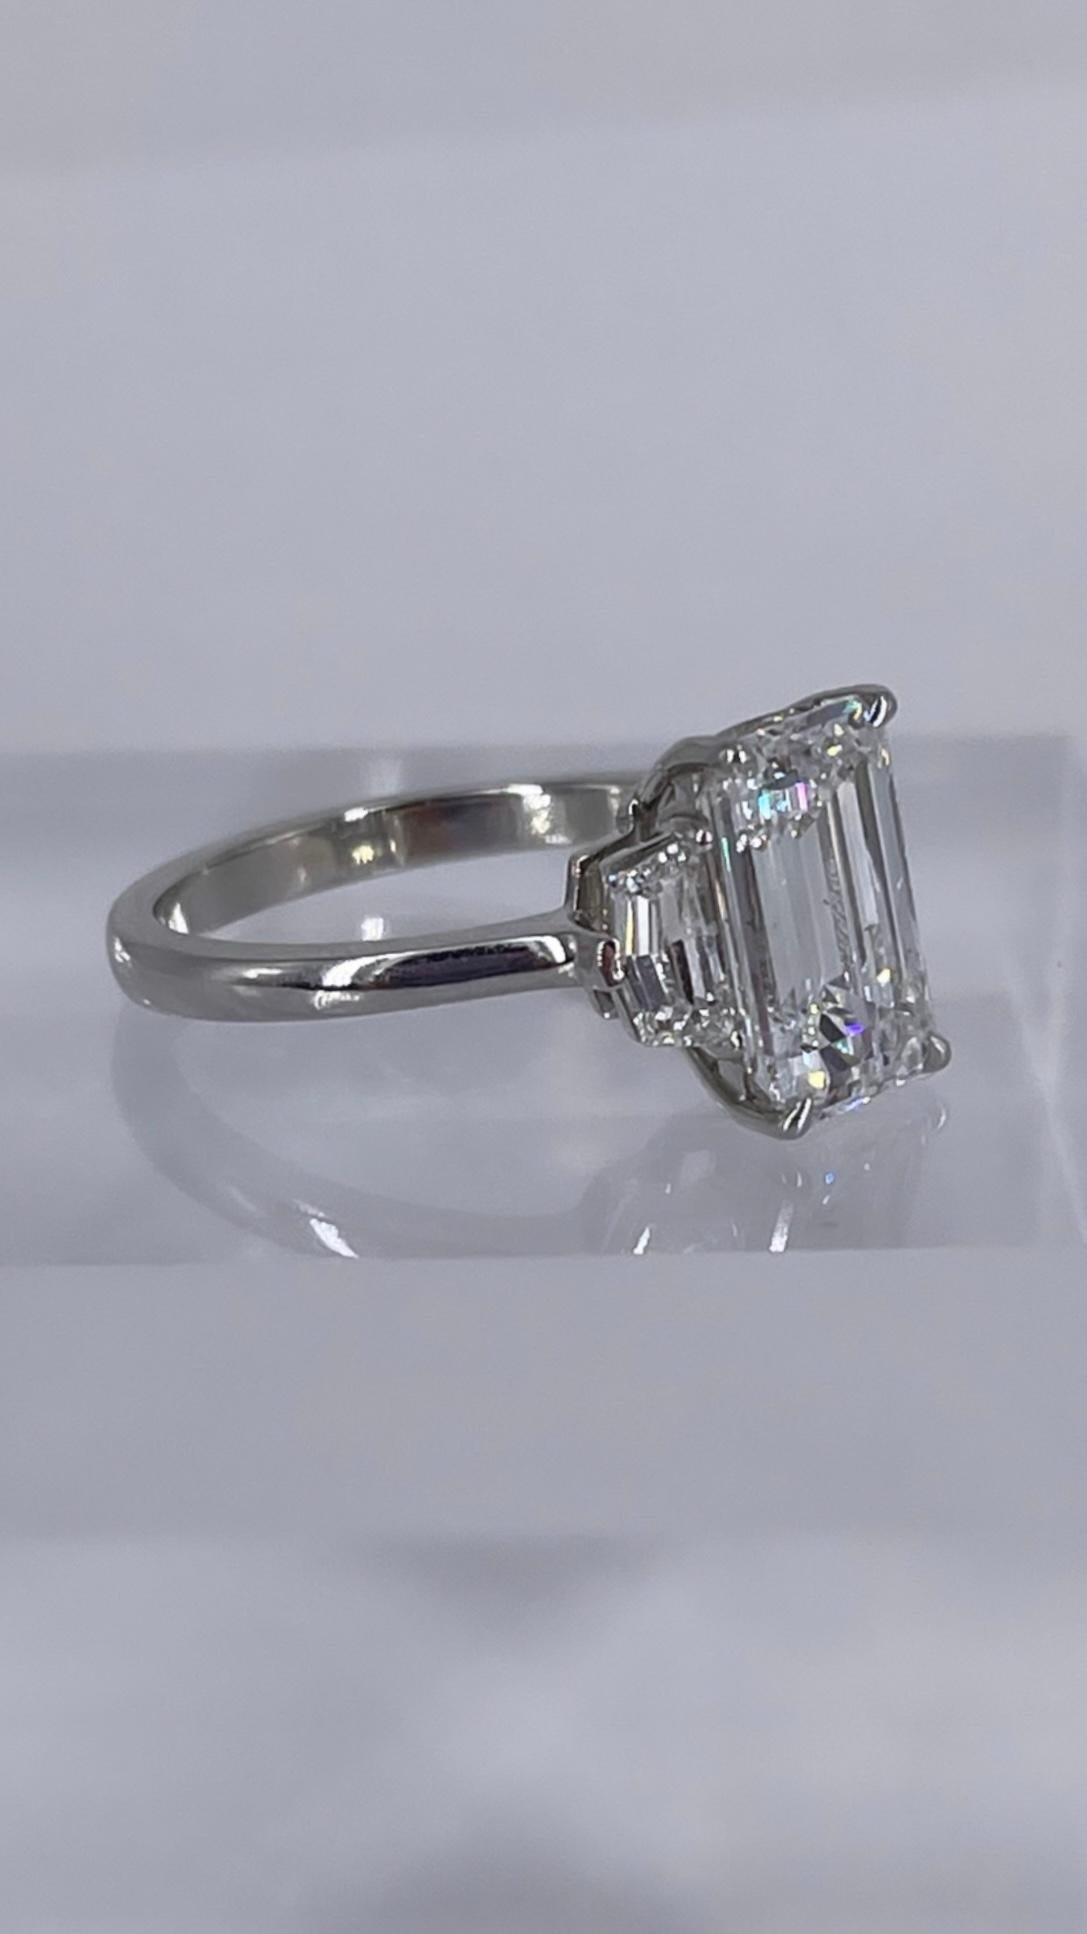 This sophisticated engagement ring by J. Birnbach features a sleek and exceptionally elongated emerald cut diamond, certified by GIA to be 3.01 carats, D color and SI1 clarity. The elegant center diamond is accented by epaulette side stones, which